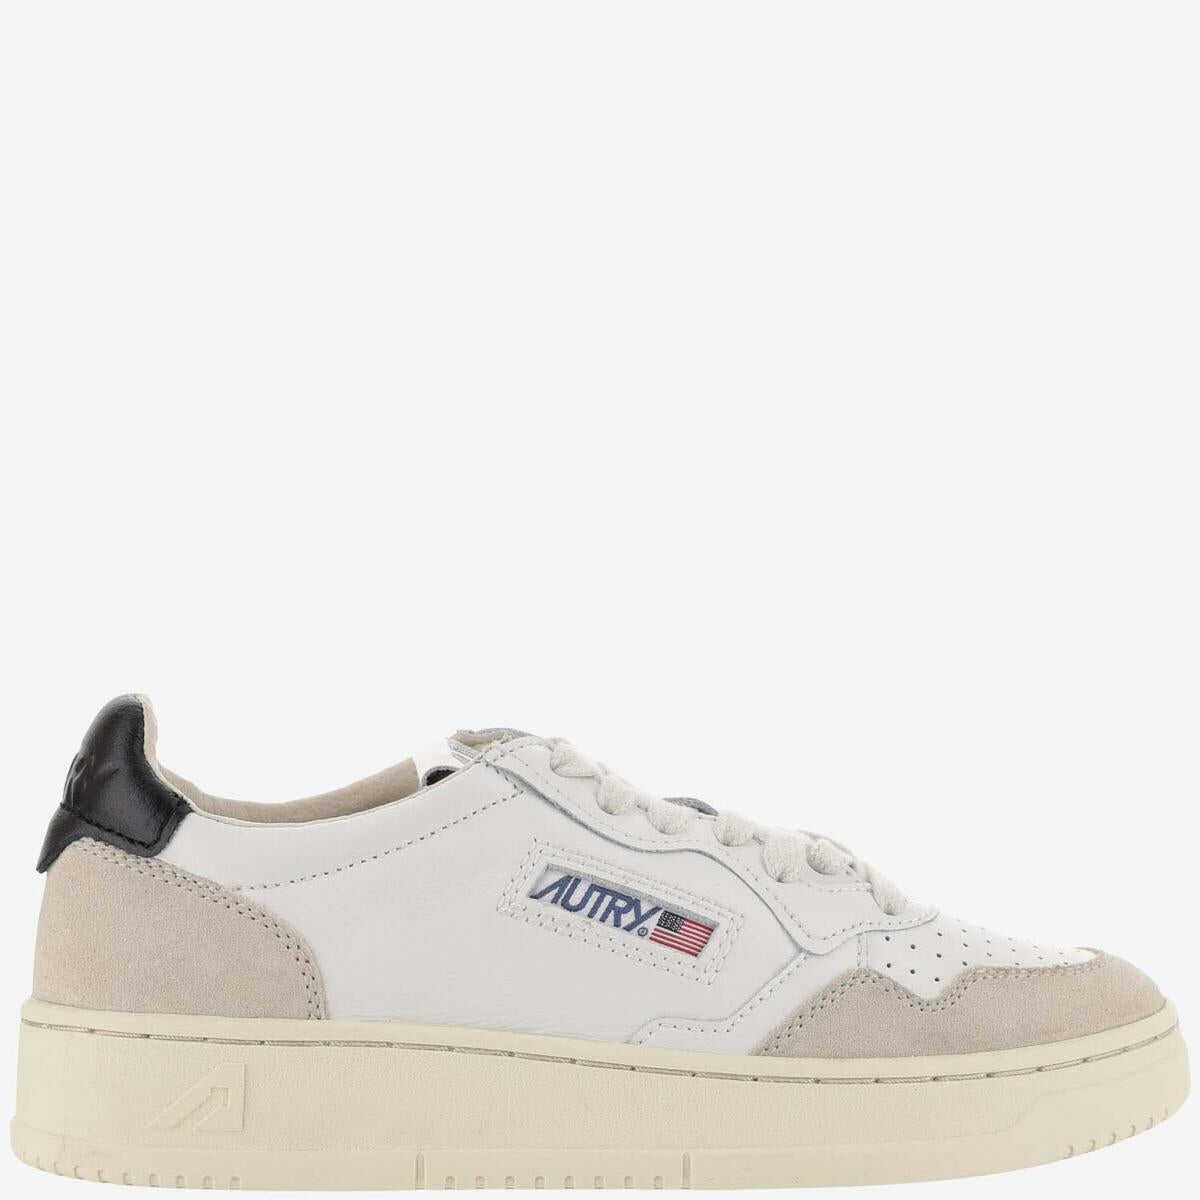 AUTRY AUTRY Sneakers White BIANCO